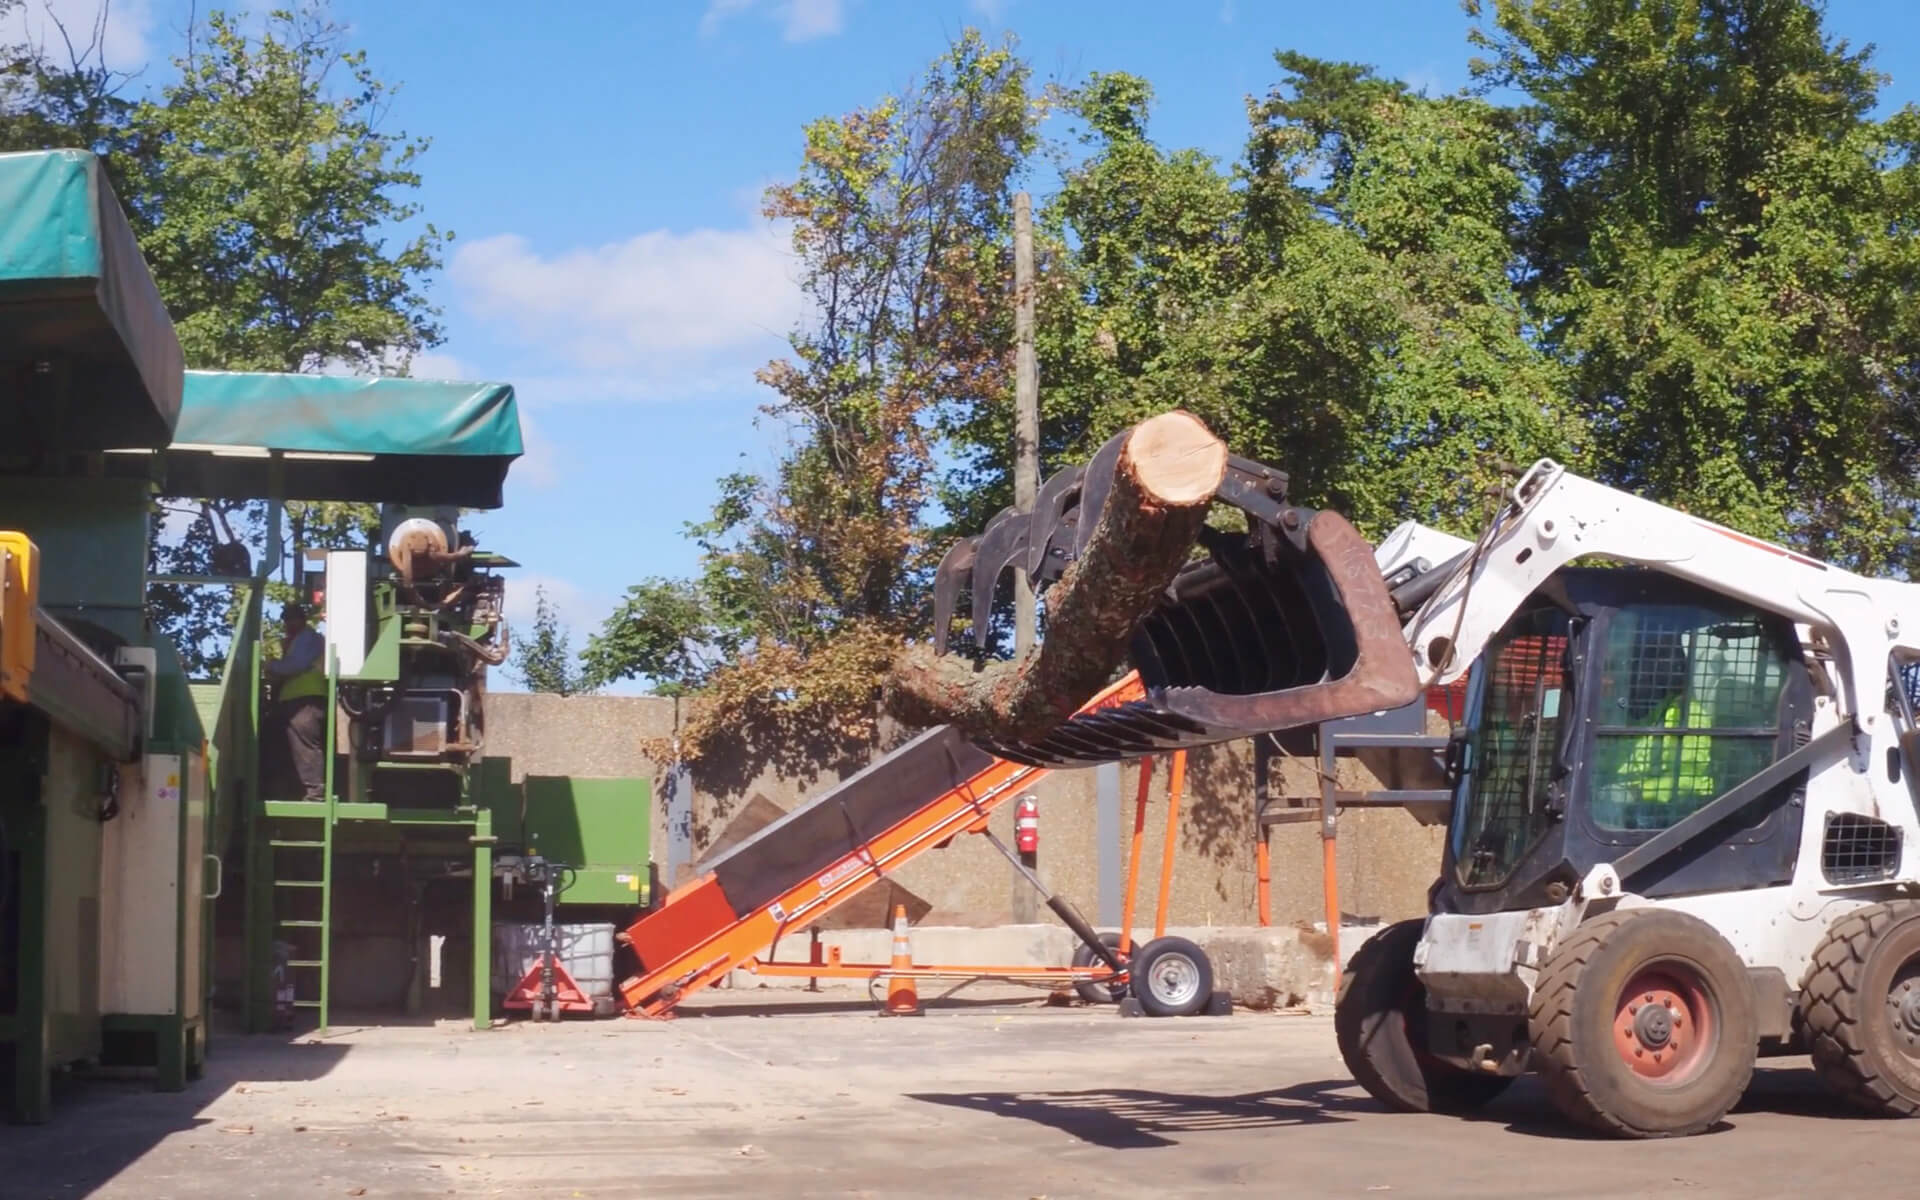 Firewood Delivery - Absolute Tree Service - Northern Virginia